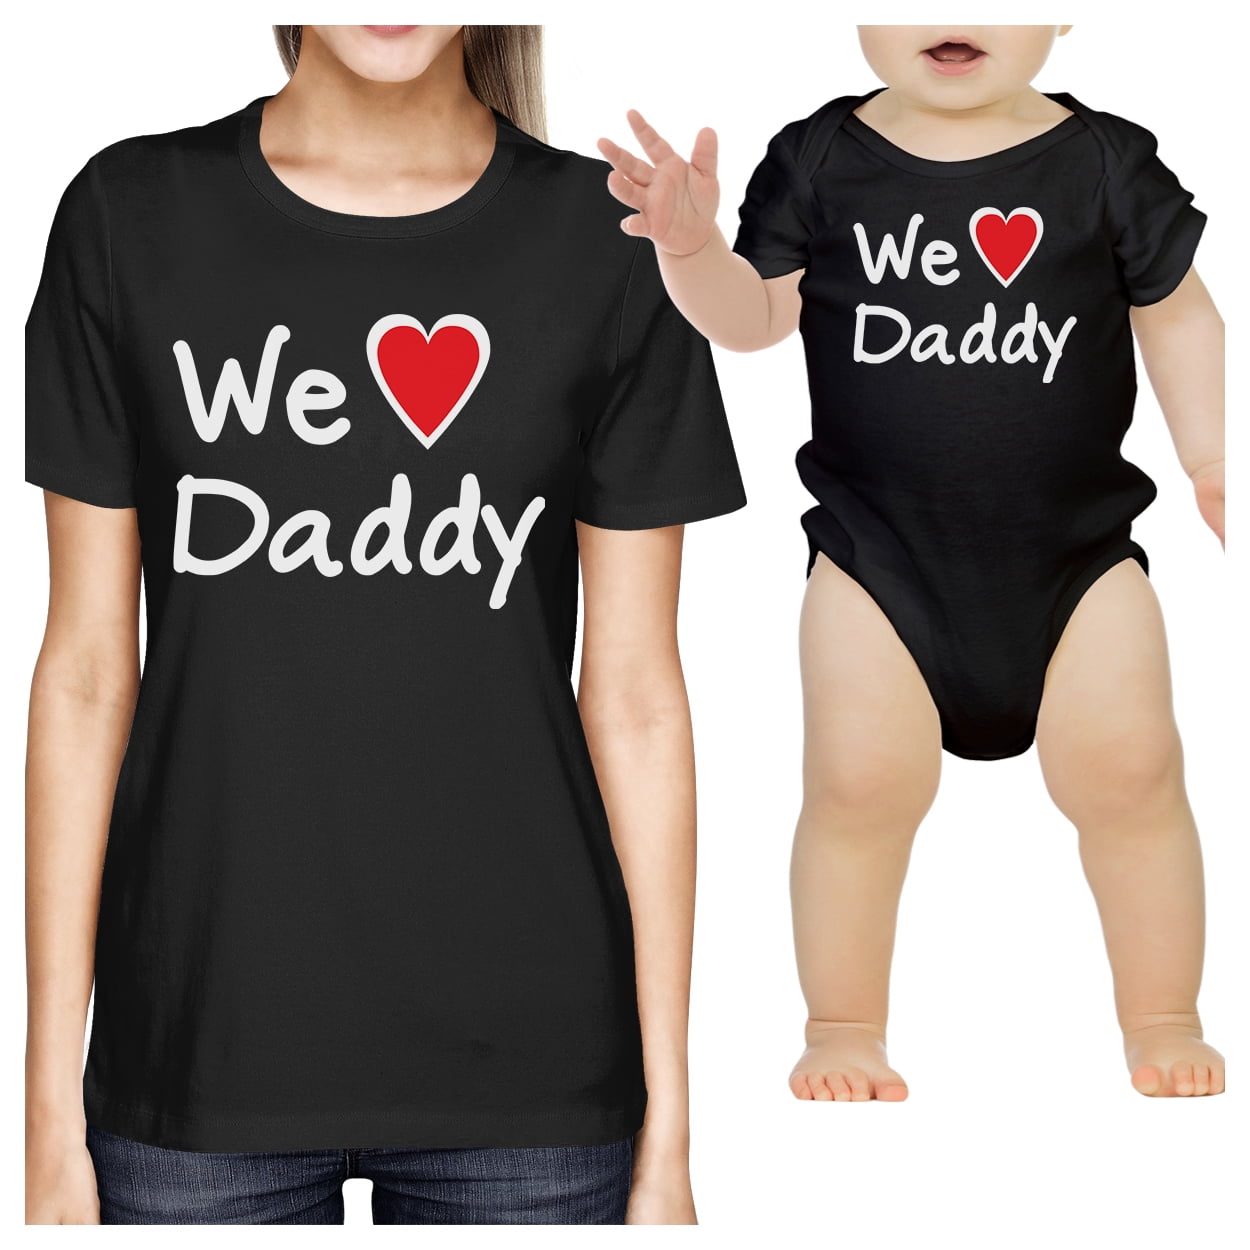 daddy outfits